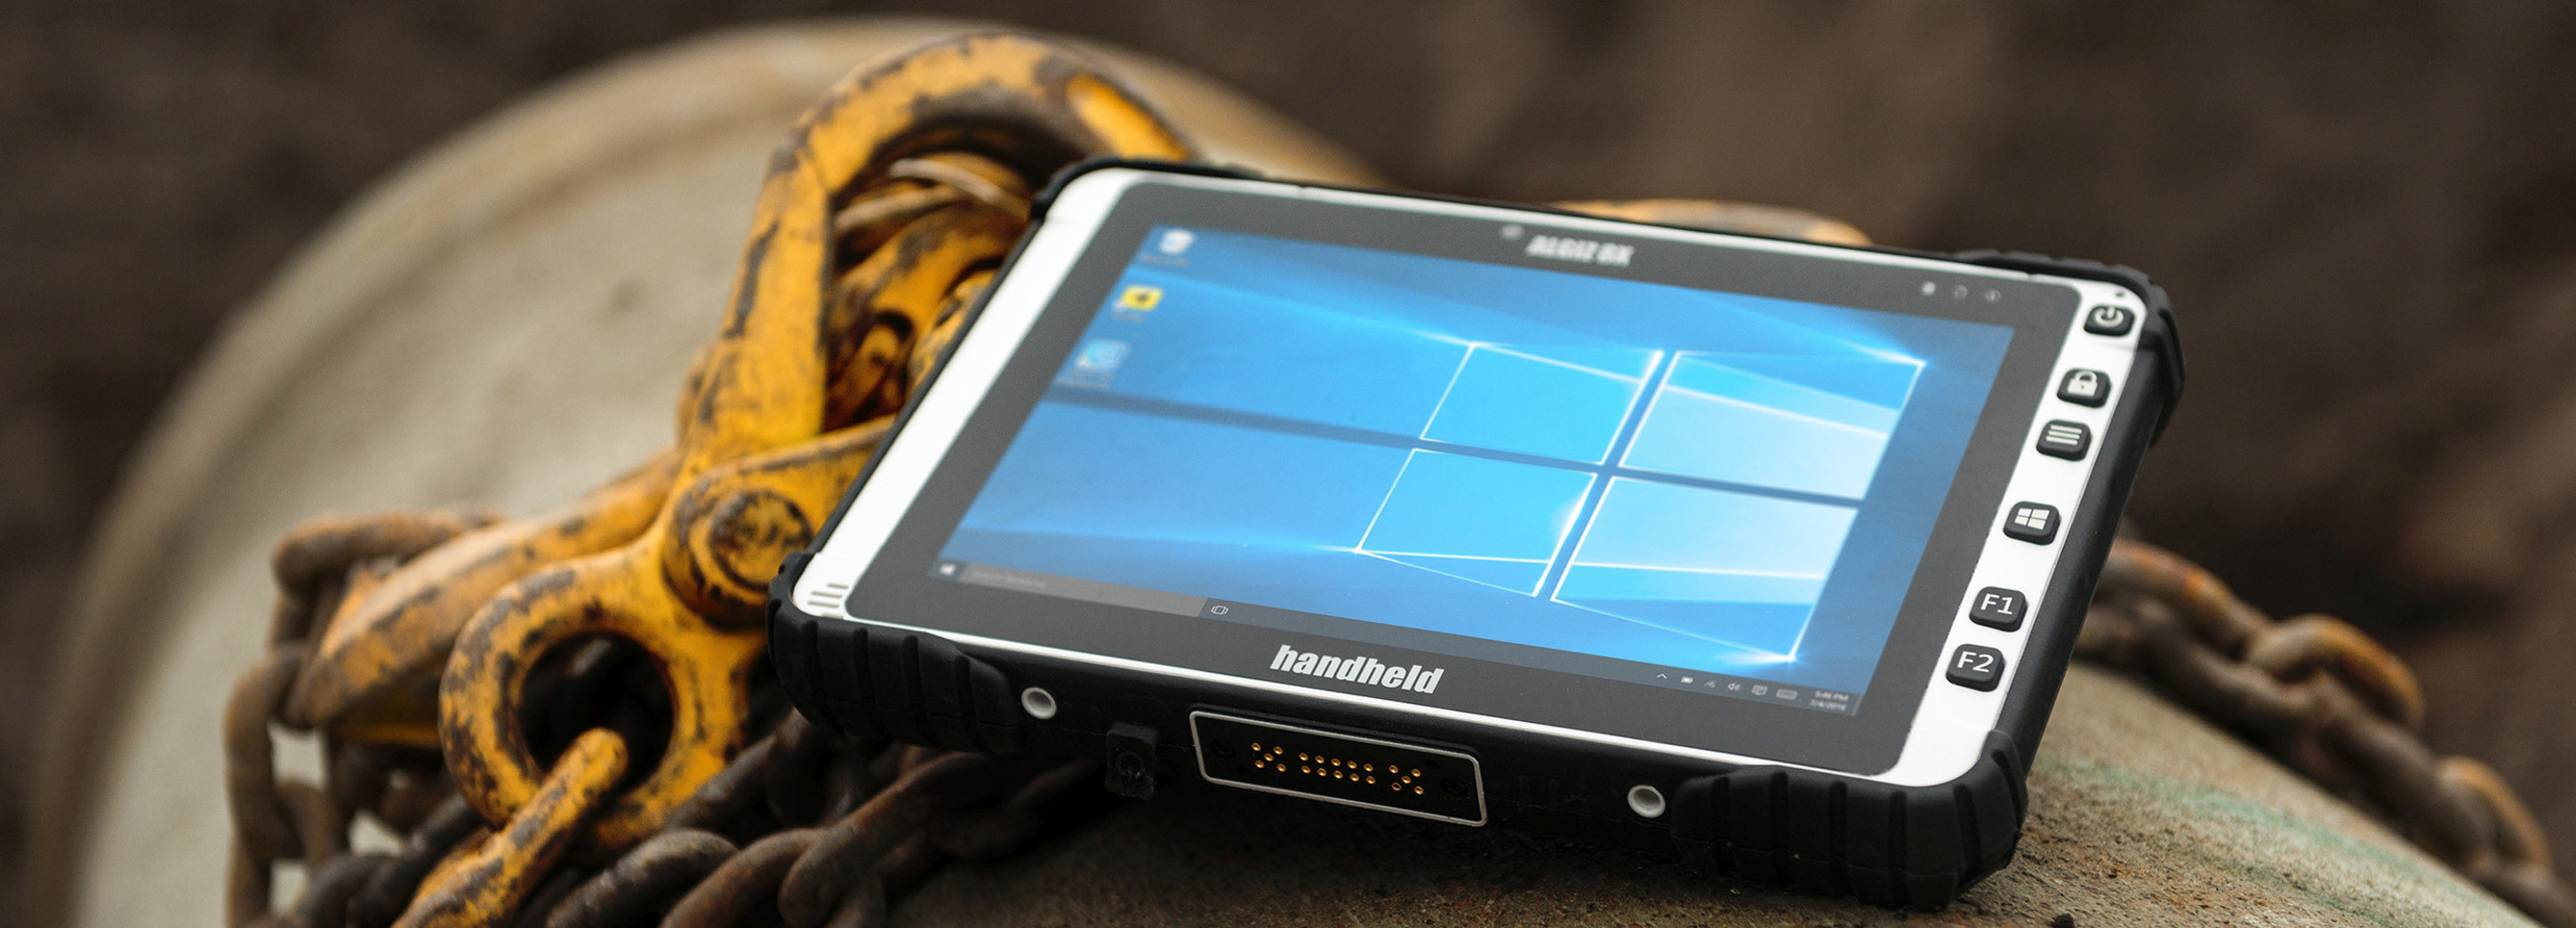 Introducing the ALGIZ 8X Rugged Tablet, a New Tough Computer from Handheld (PRNewsFoto/Handheld Group)